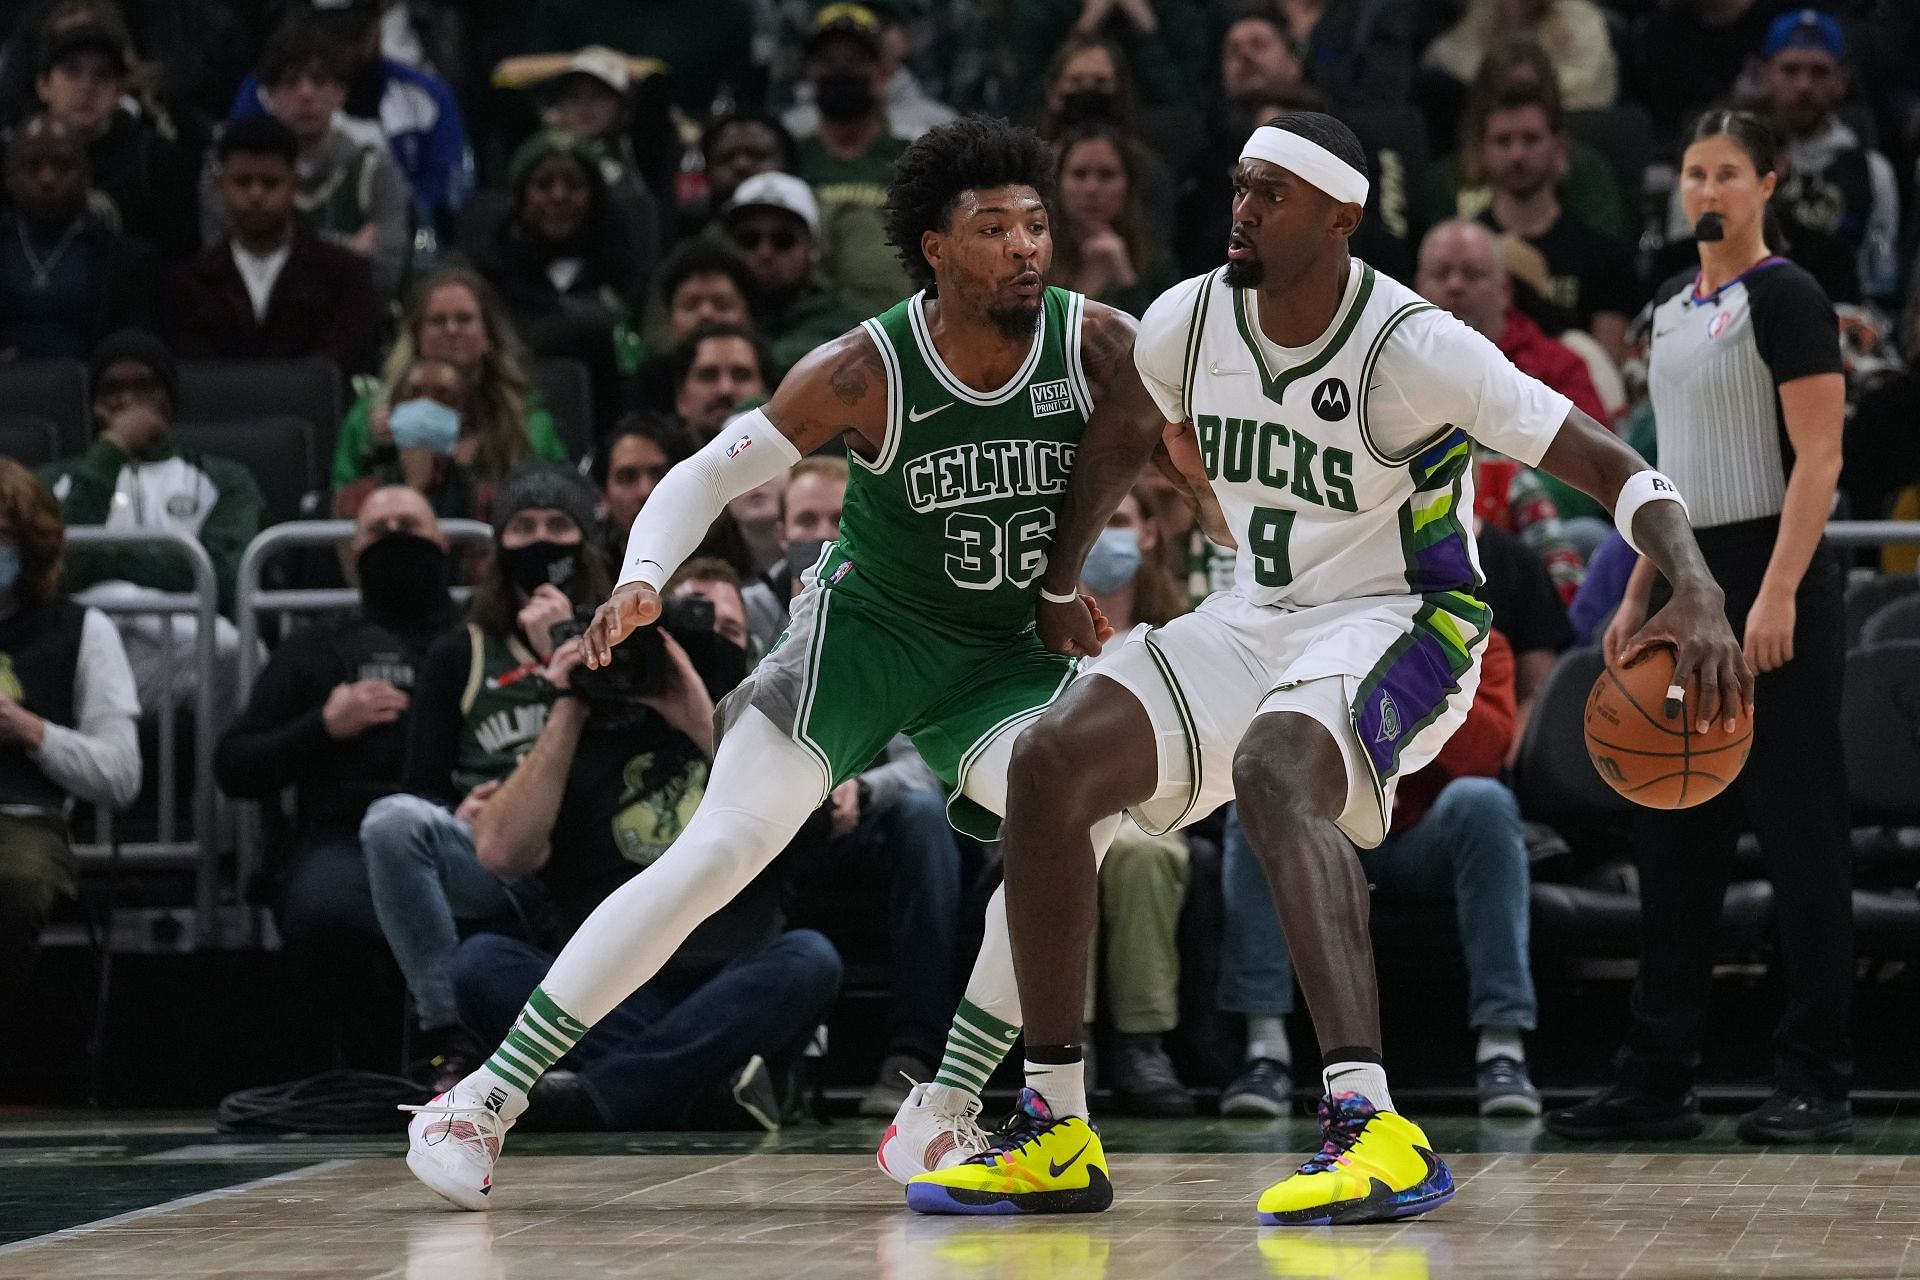 Marcus Smart defends against Bobby Portis